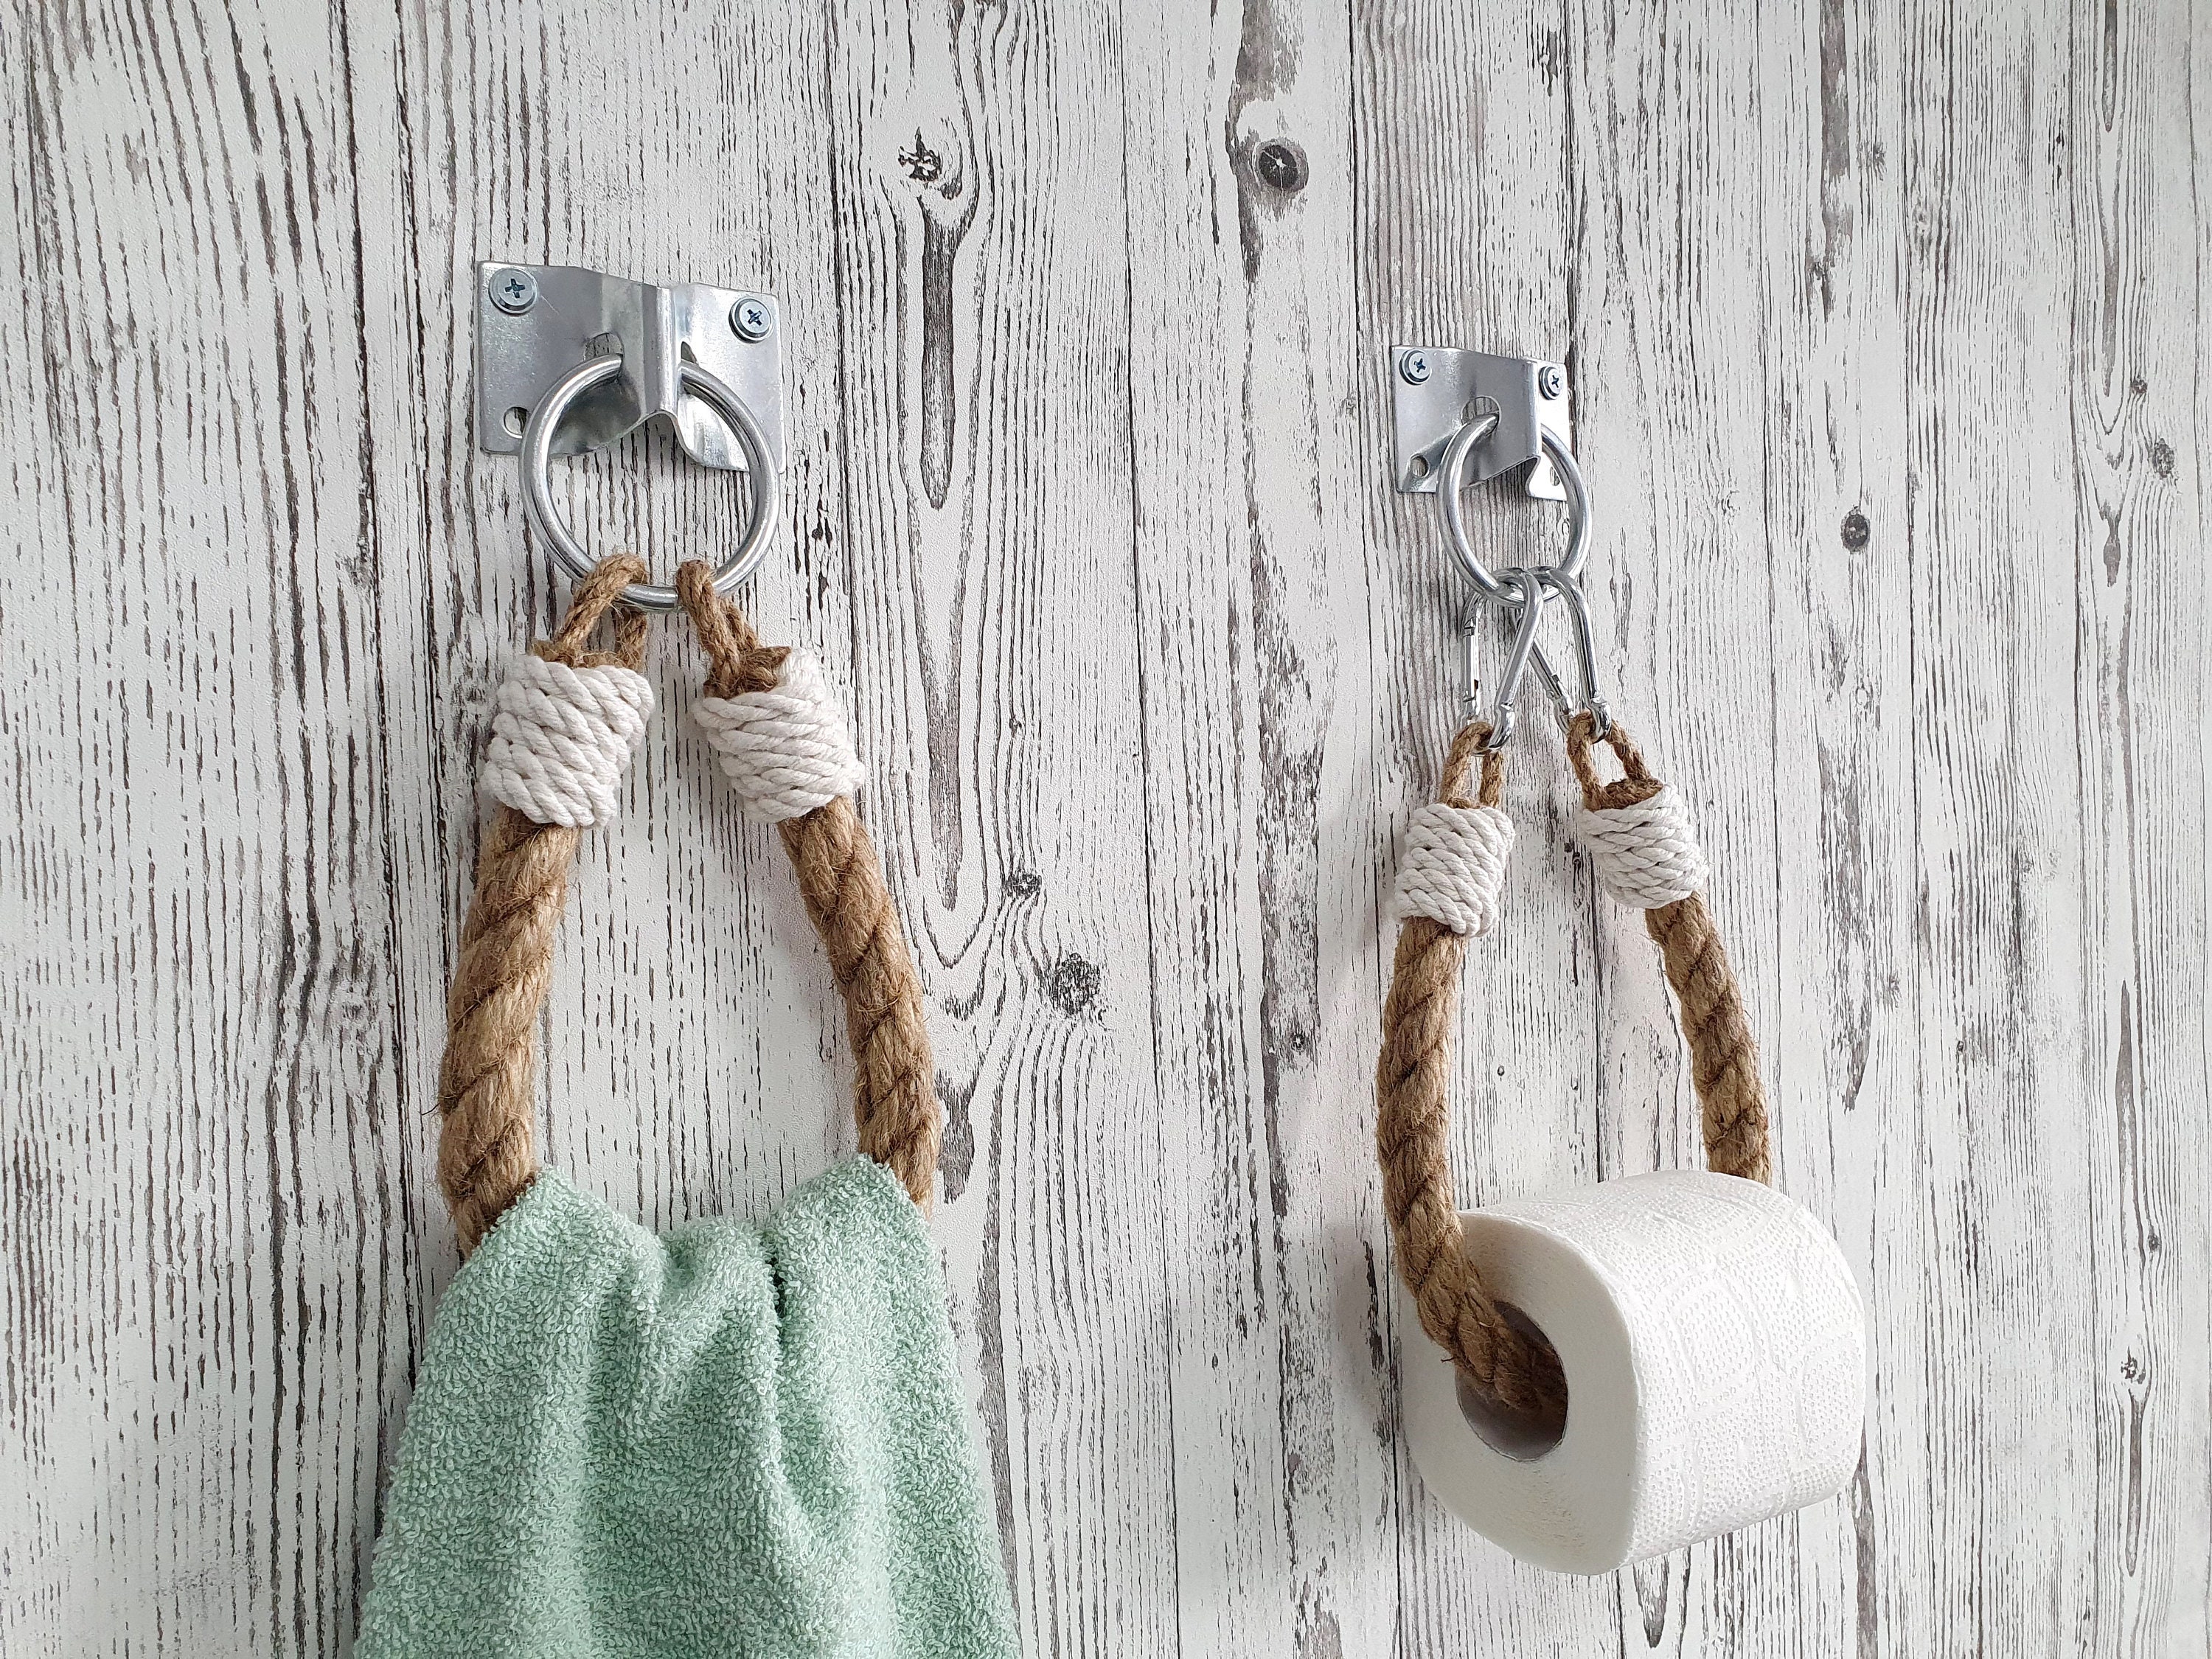 Industrial Style Wall Mount Iron Pipe Paper Holder Vintage Kitchen Bathroom  Wall Hanging Roll Shelf Rack Toilet Tissue Towel Rack From Qimeiyao22,  $17.37